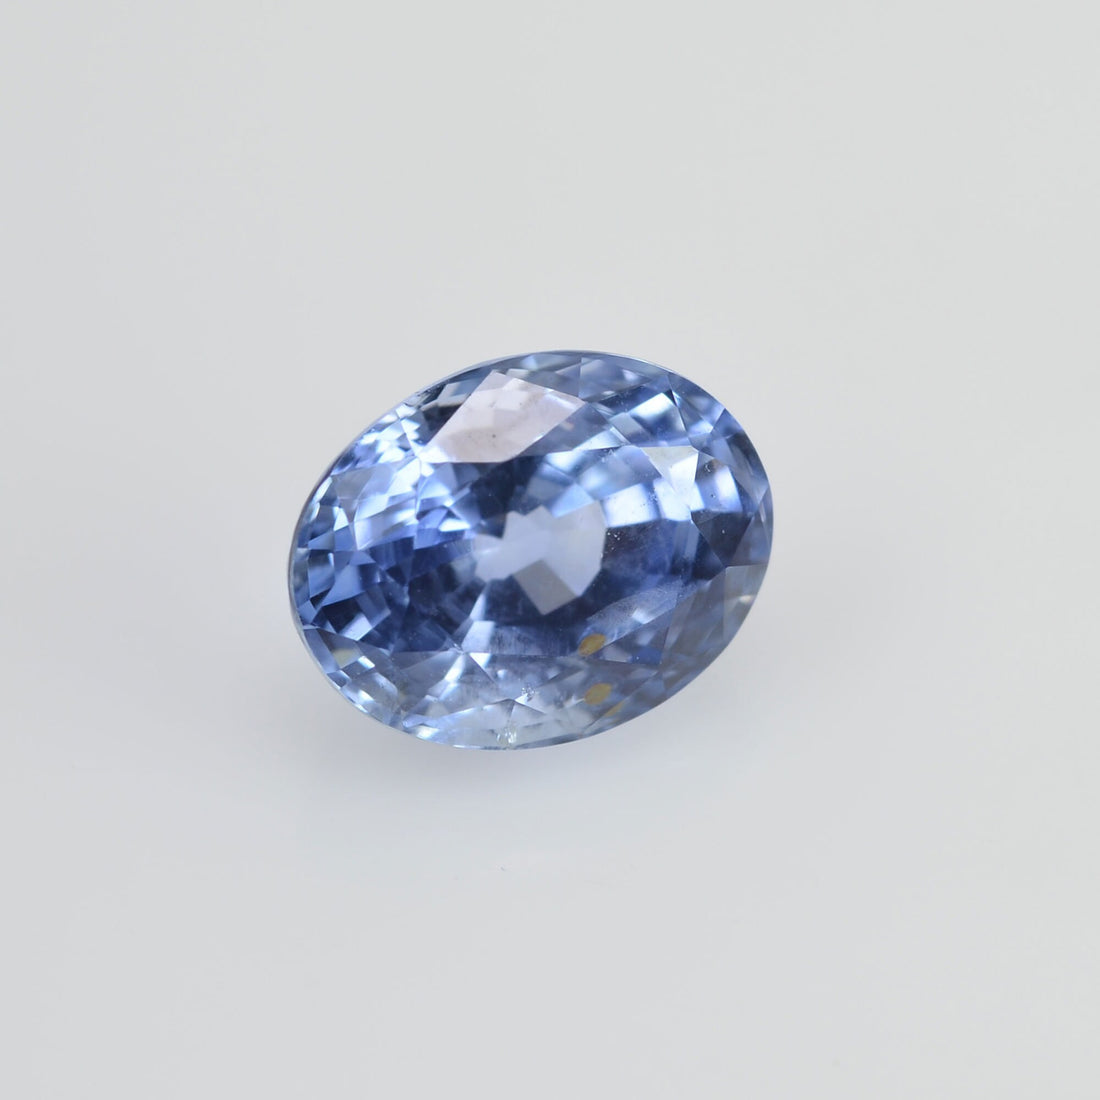 1.72 cts Natural Blue Sapphire Loose Gemstone Oval Cut